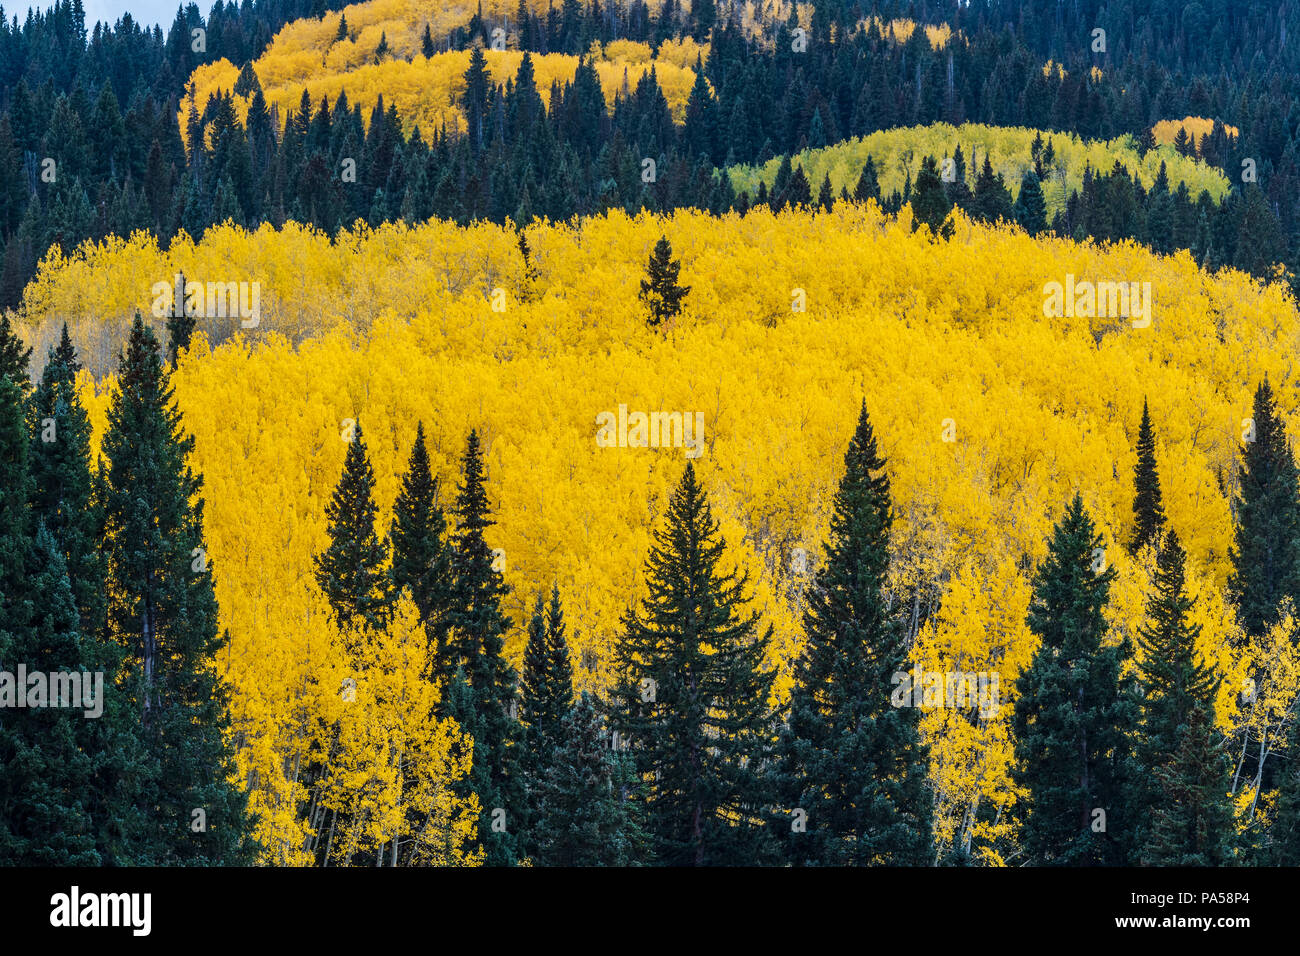 Aspen trees and autumn color along Kebler Pass in West Elk Mountains near Crested Butte, Colorado. Stock Photo